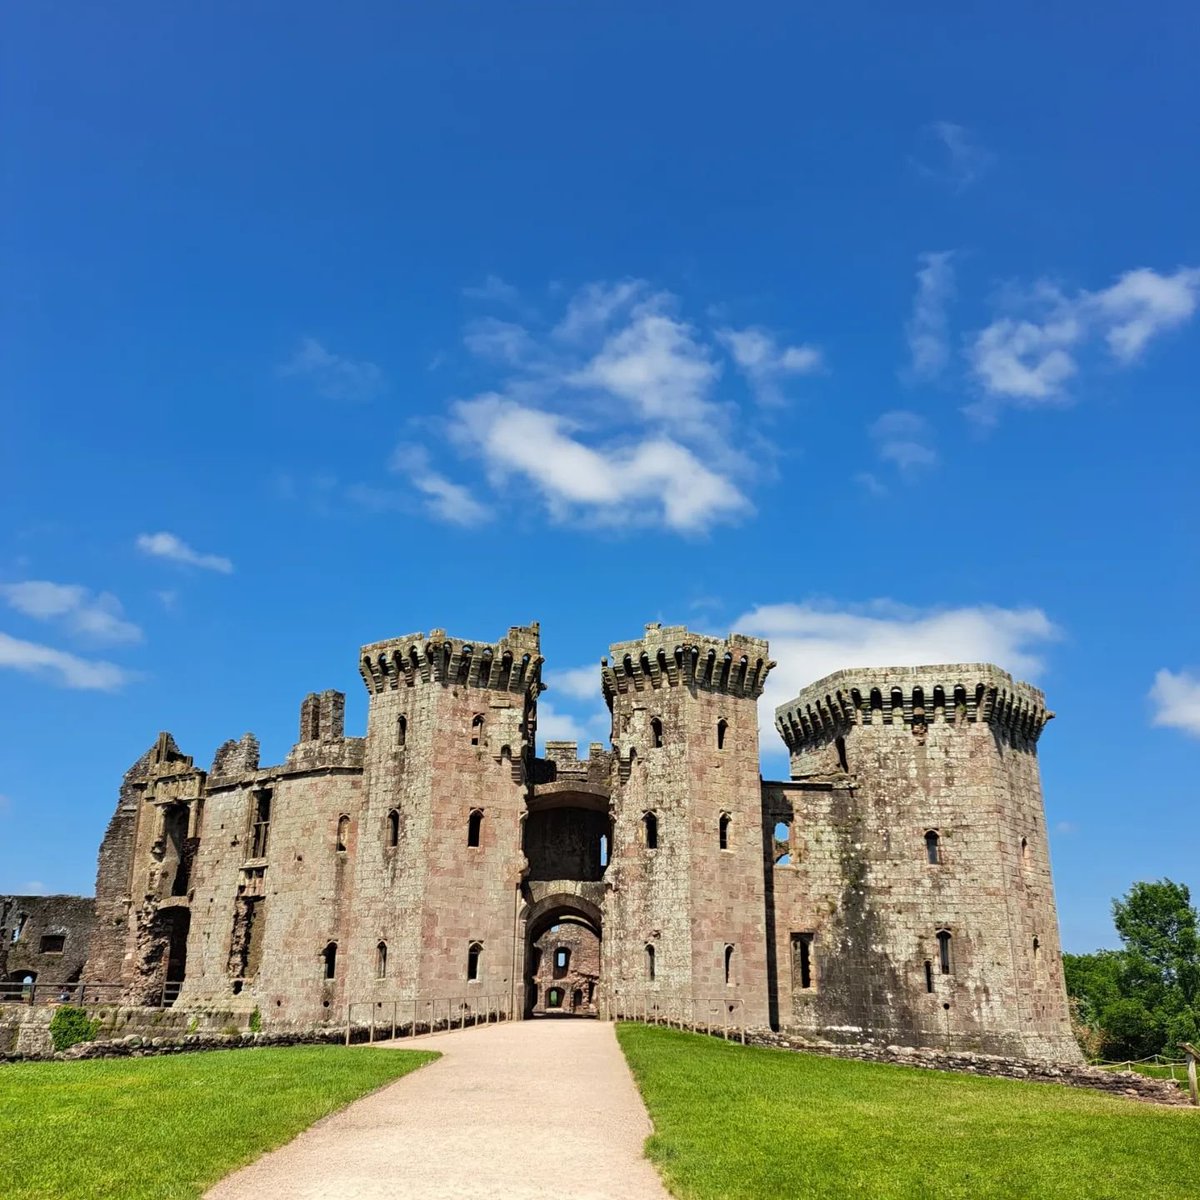 Enjoy FREE entry to Cadw sites across Monmouthshire tomorrow (1st March) to celebrate St. David's Day. That's free entry to Raglan Castle, Tintern Abbey and Chepstow Castle!

They're open 9.30 - 5 so you could even squeeze in all three! 

#stdavidsday #lovemonmouthshire